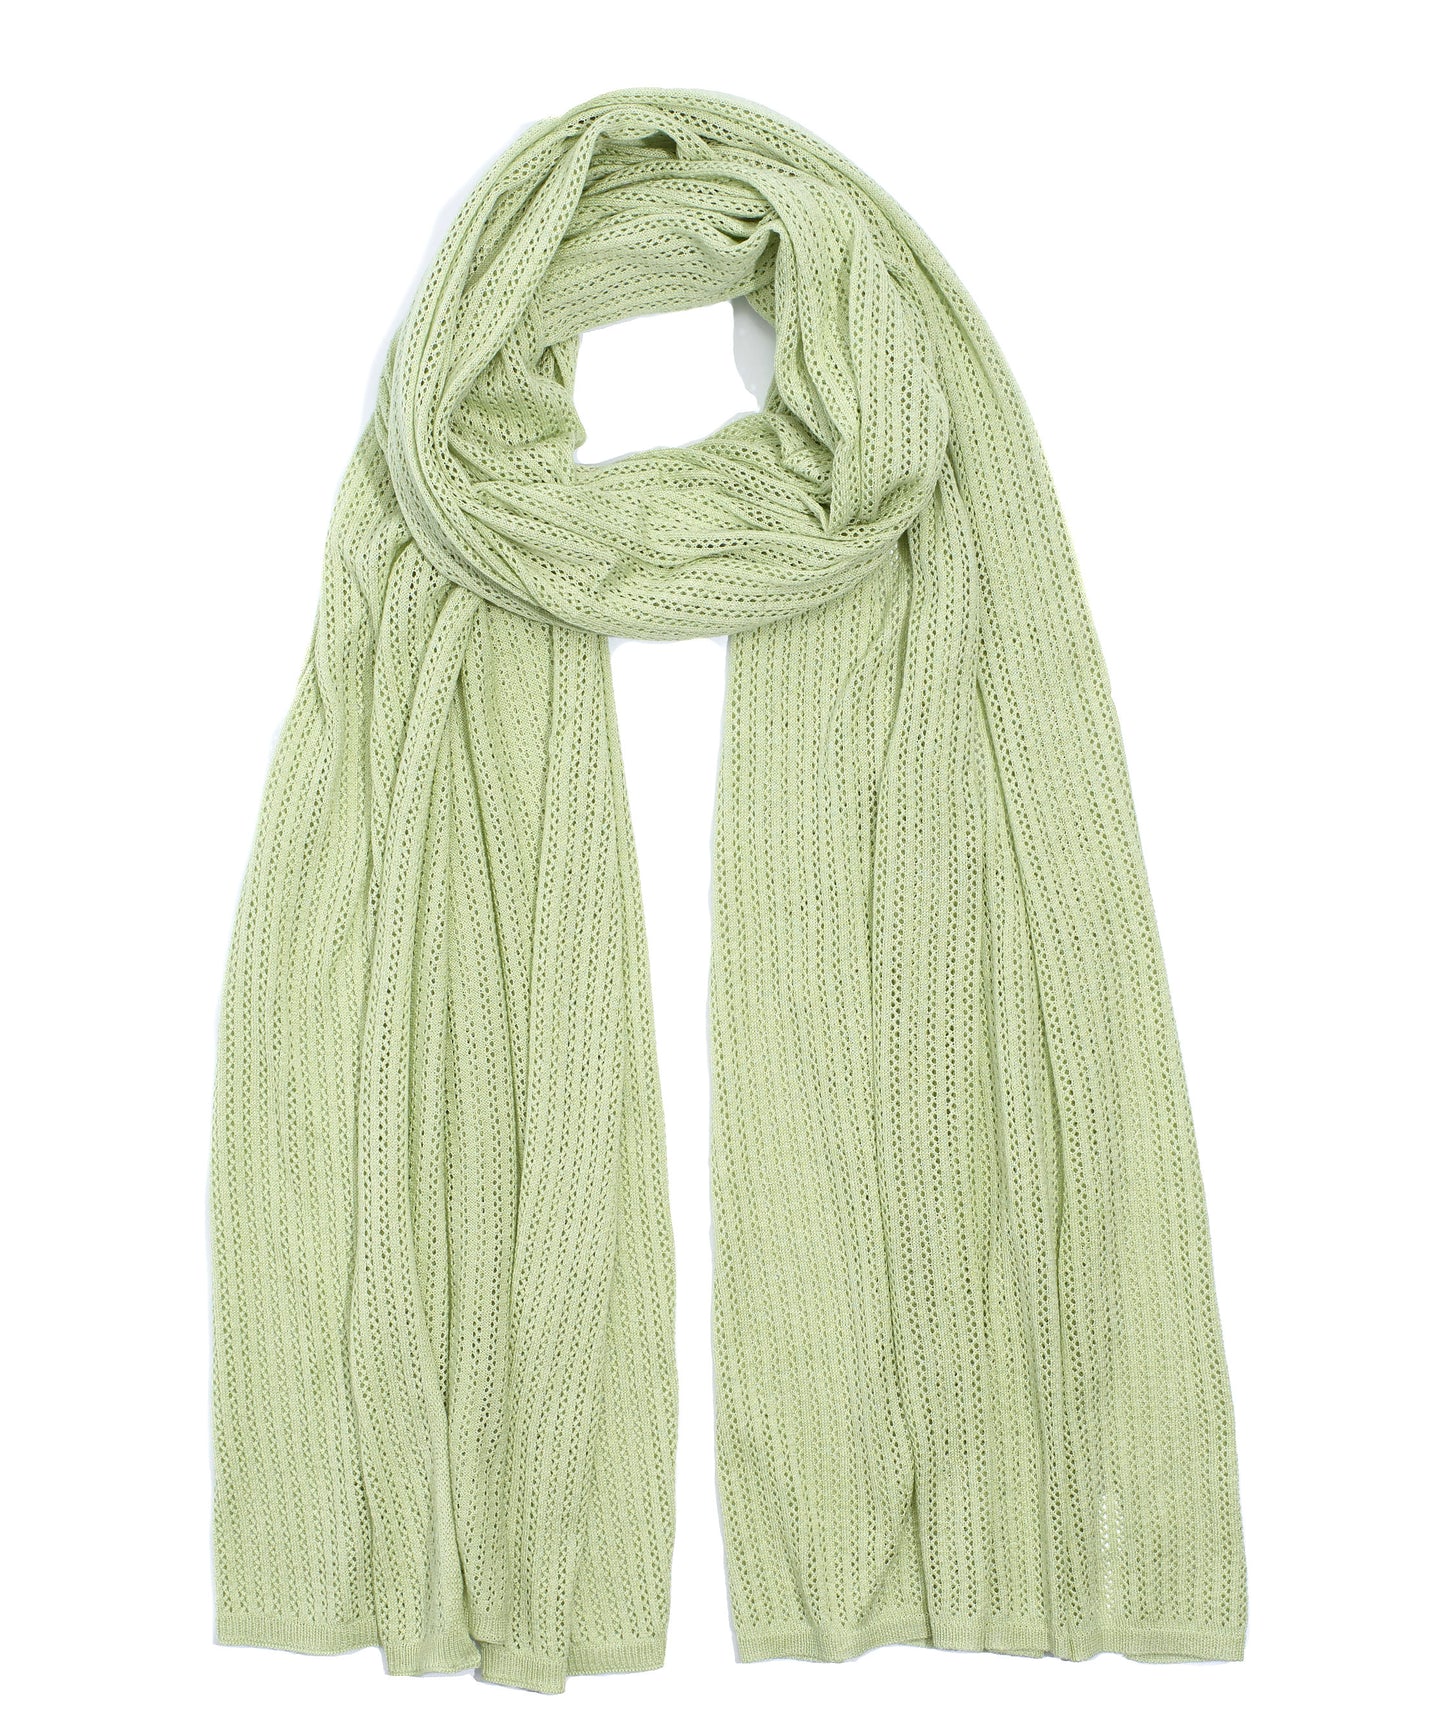 Netting Stitch Wrap in color Cucumber